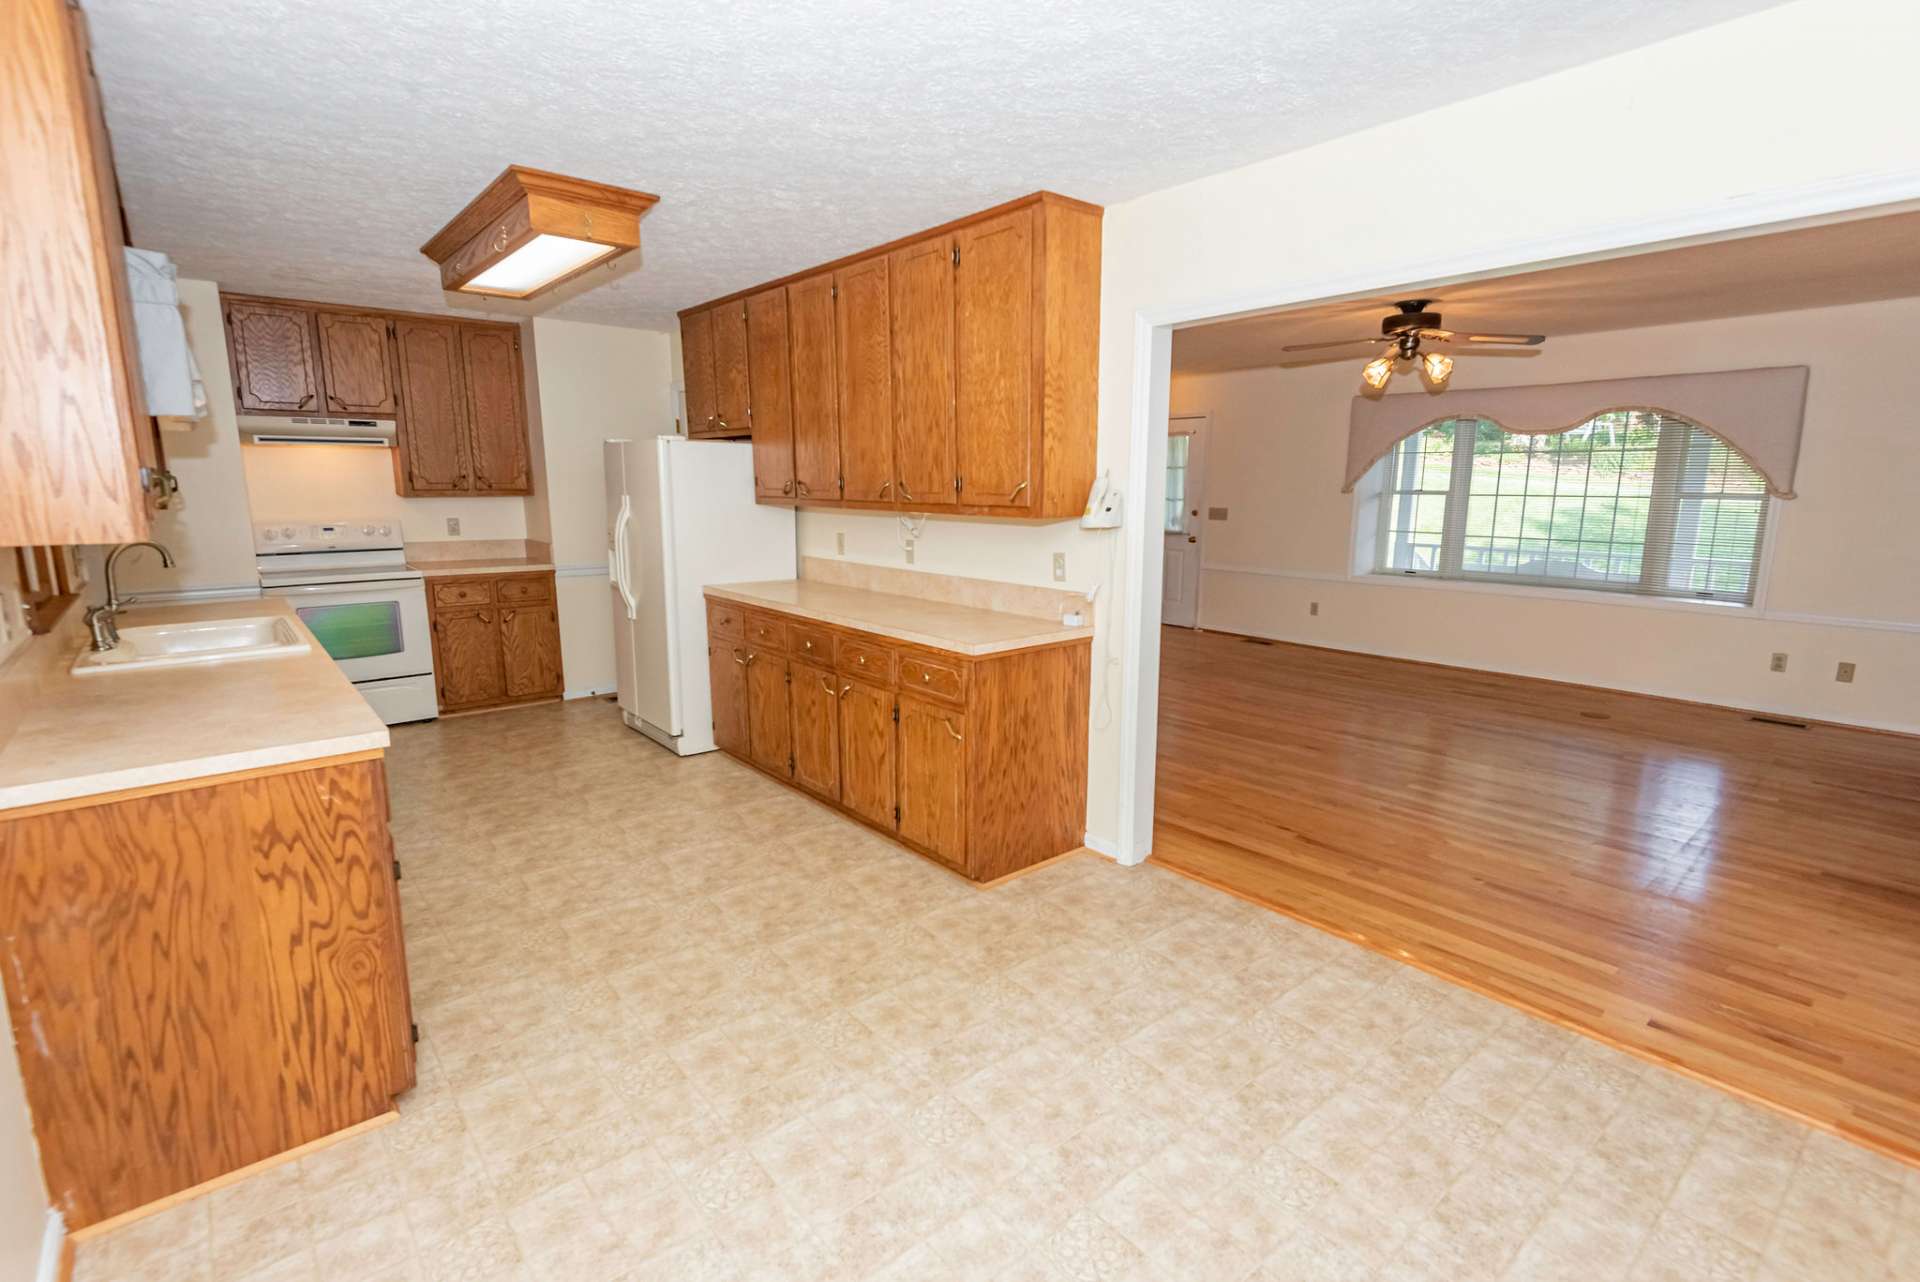 Open to the living area, the galley style kitchen offers plenty of work and storage space.